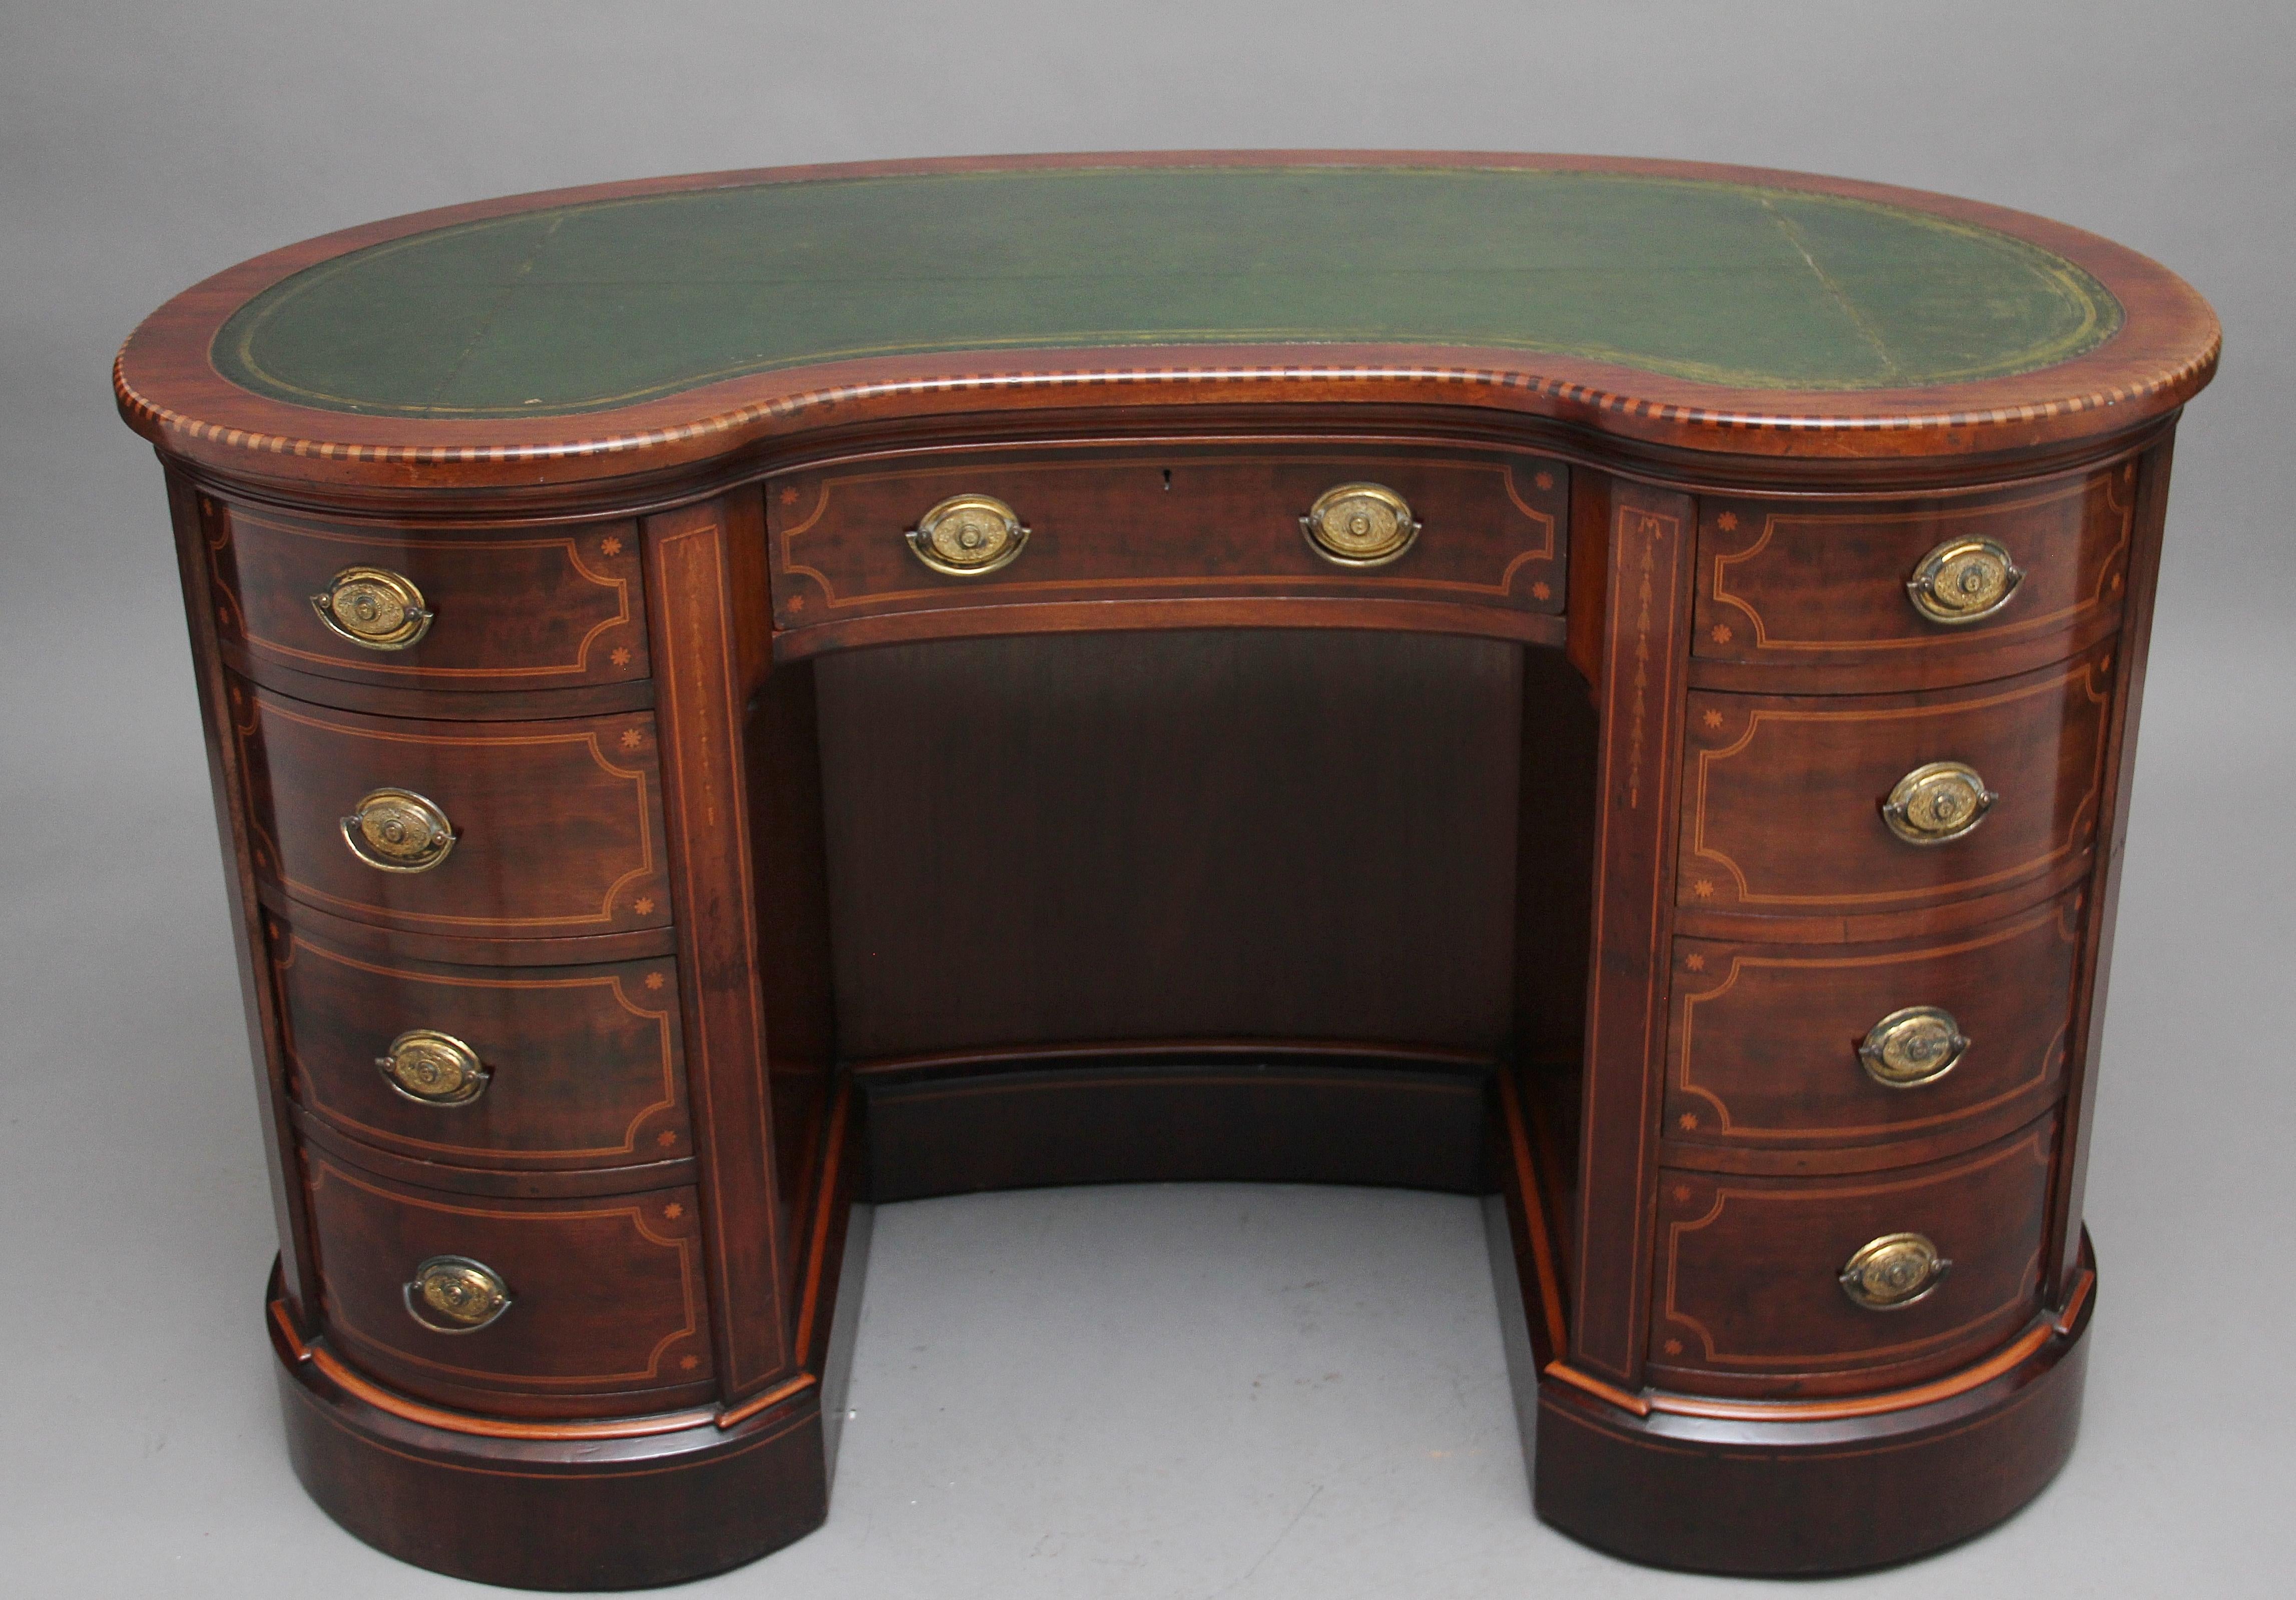 19th Century Inlaid Mahogany Kidney Shaped Desk with a Wonderful Provenance 1